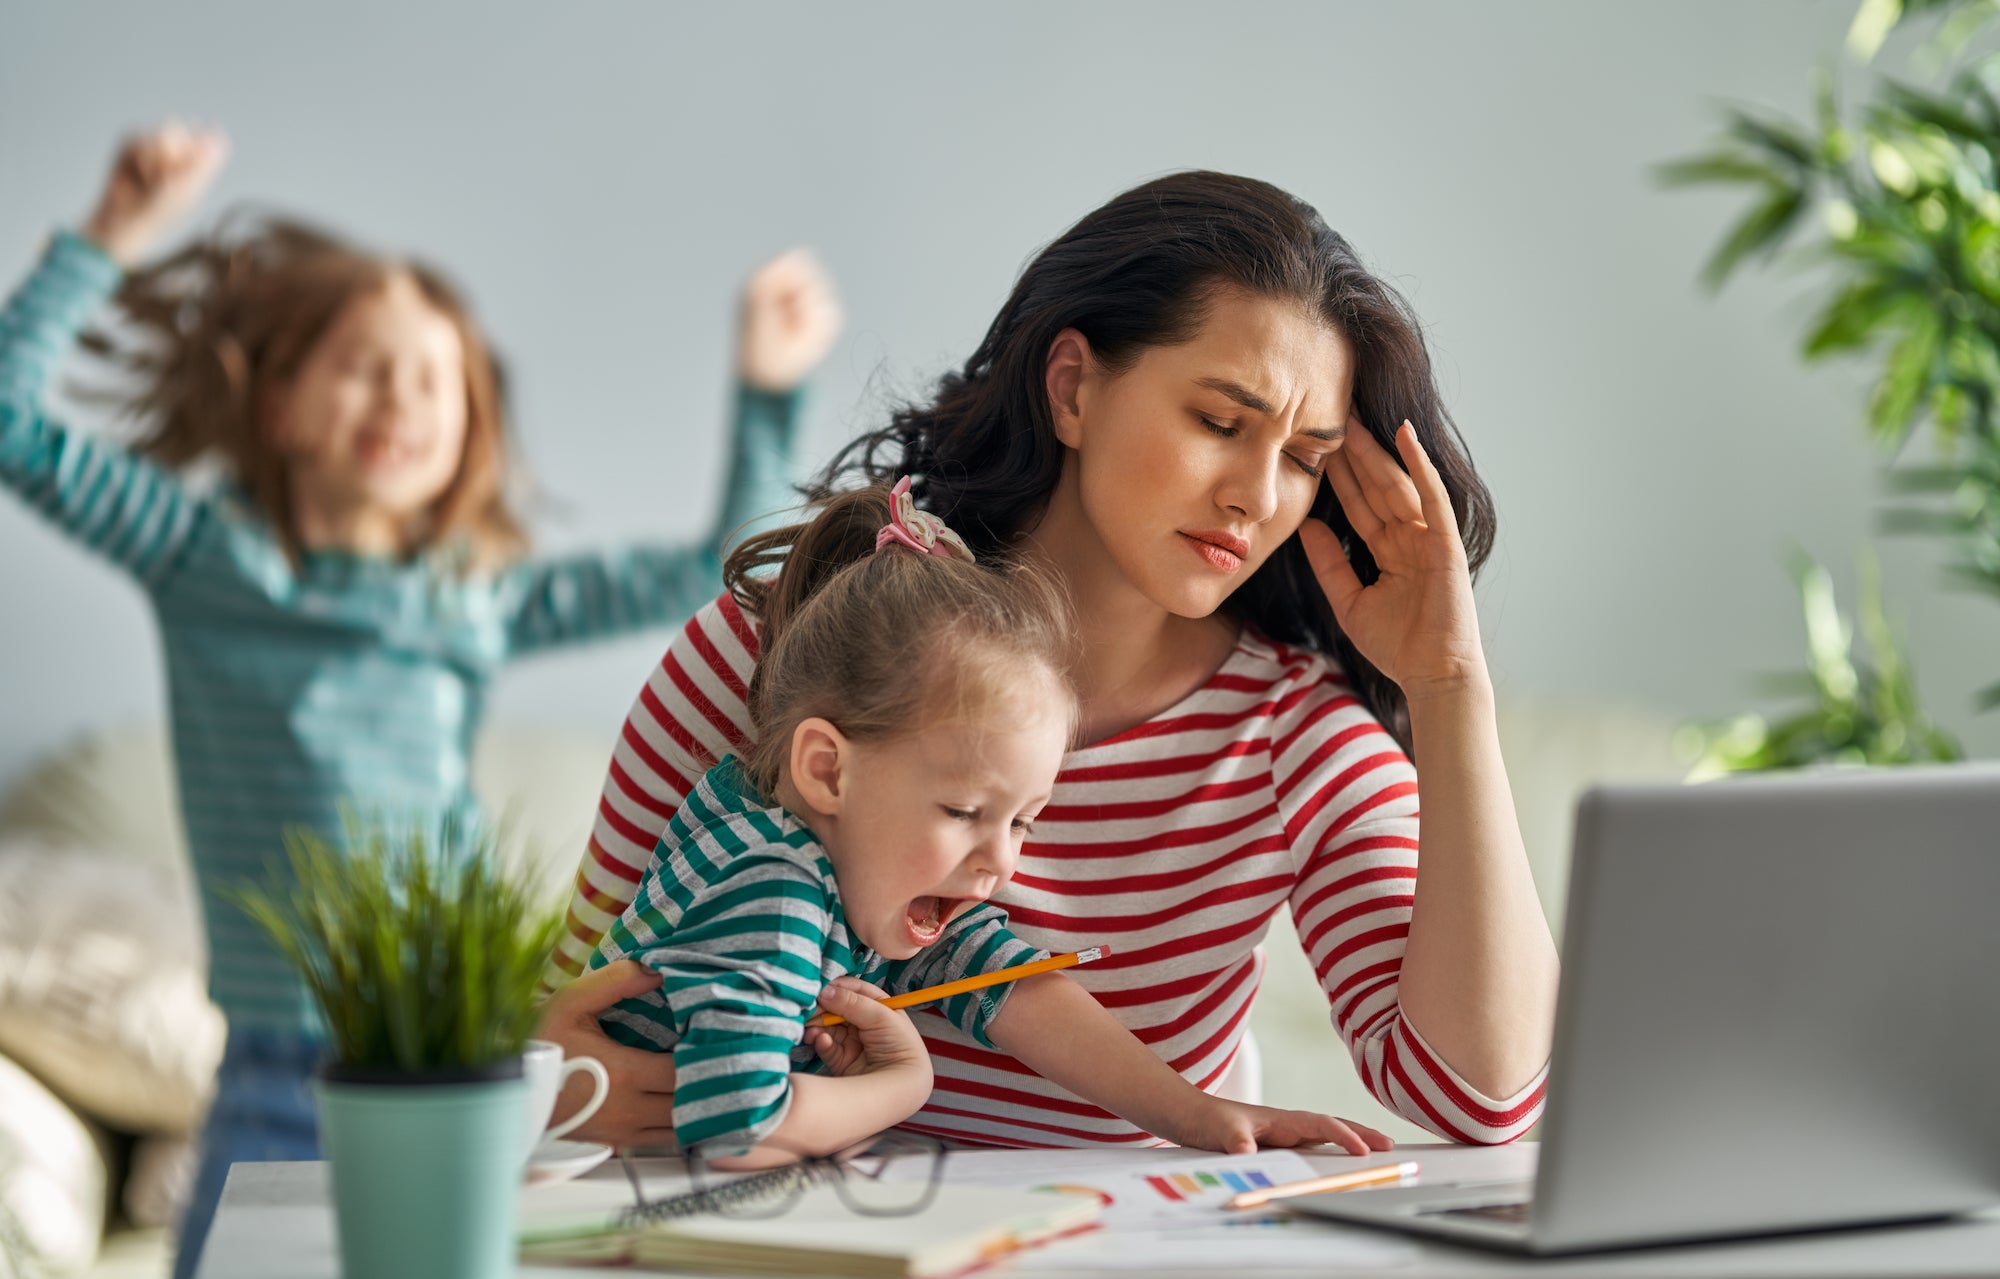 5 Tips to Overcome Working Mom Stress